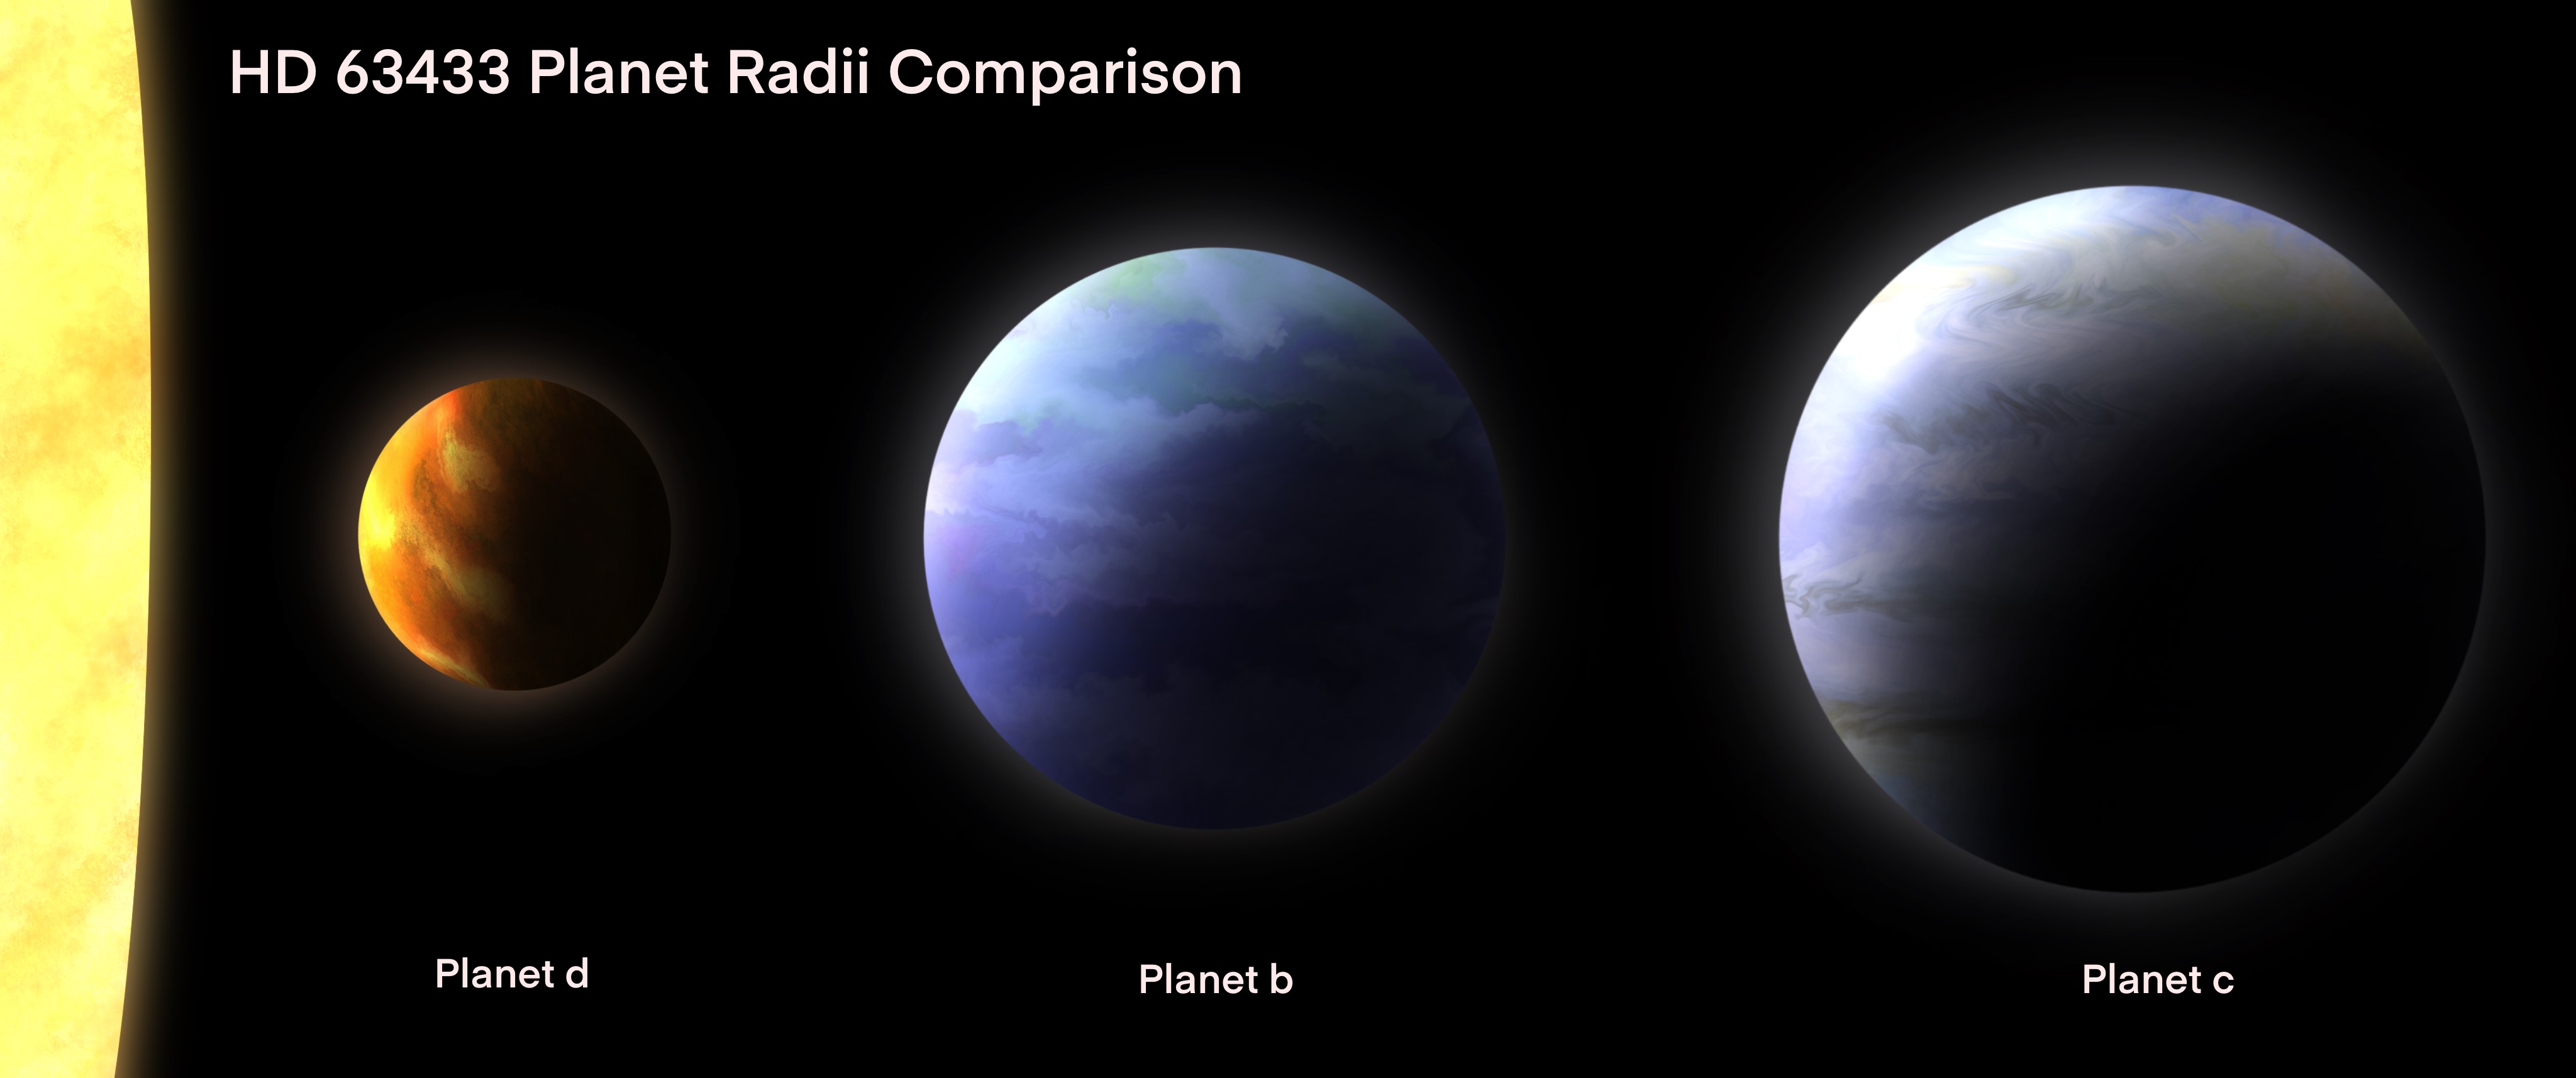 Illustration comparing the size of three planets